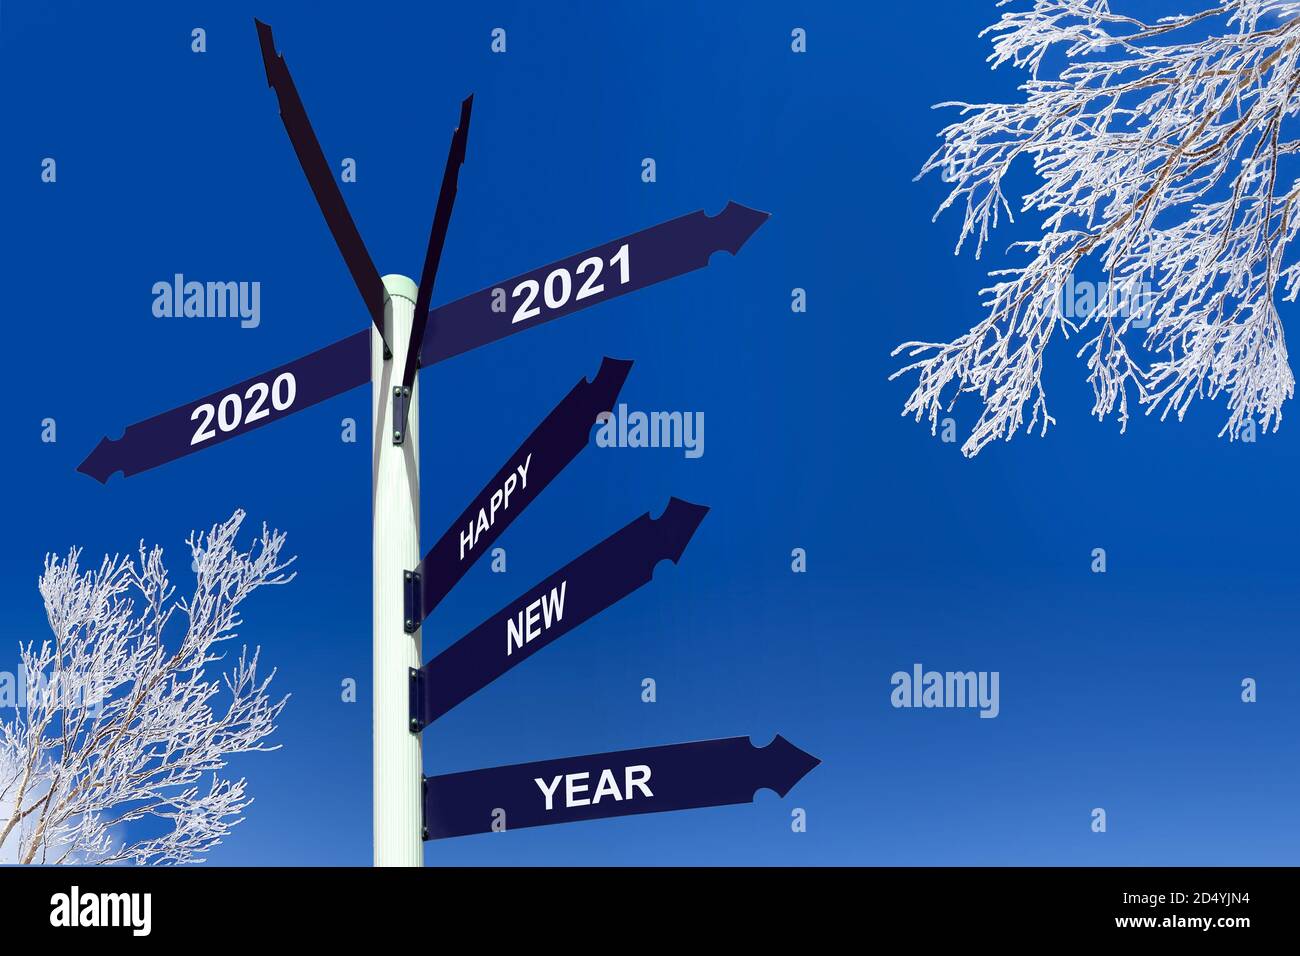 Happy new year 2021 on direction panels, snowy trees Stock Photo